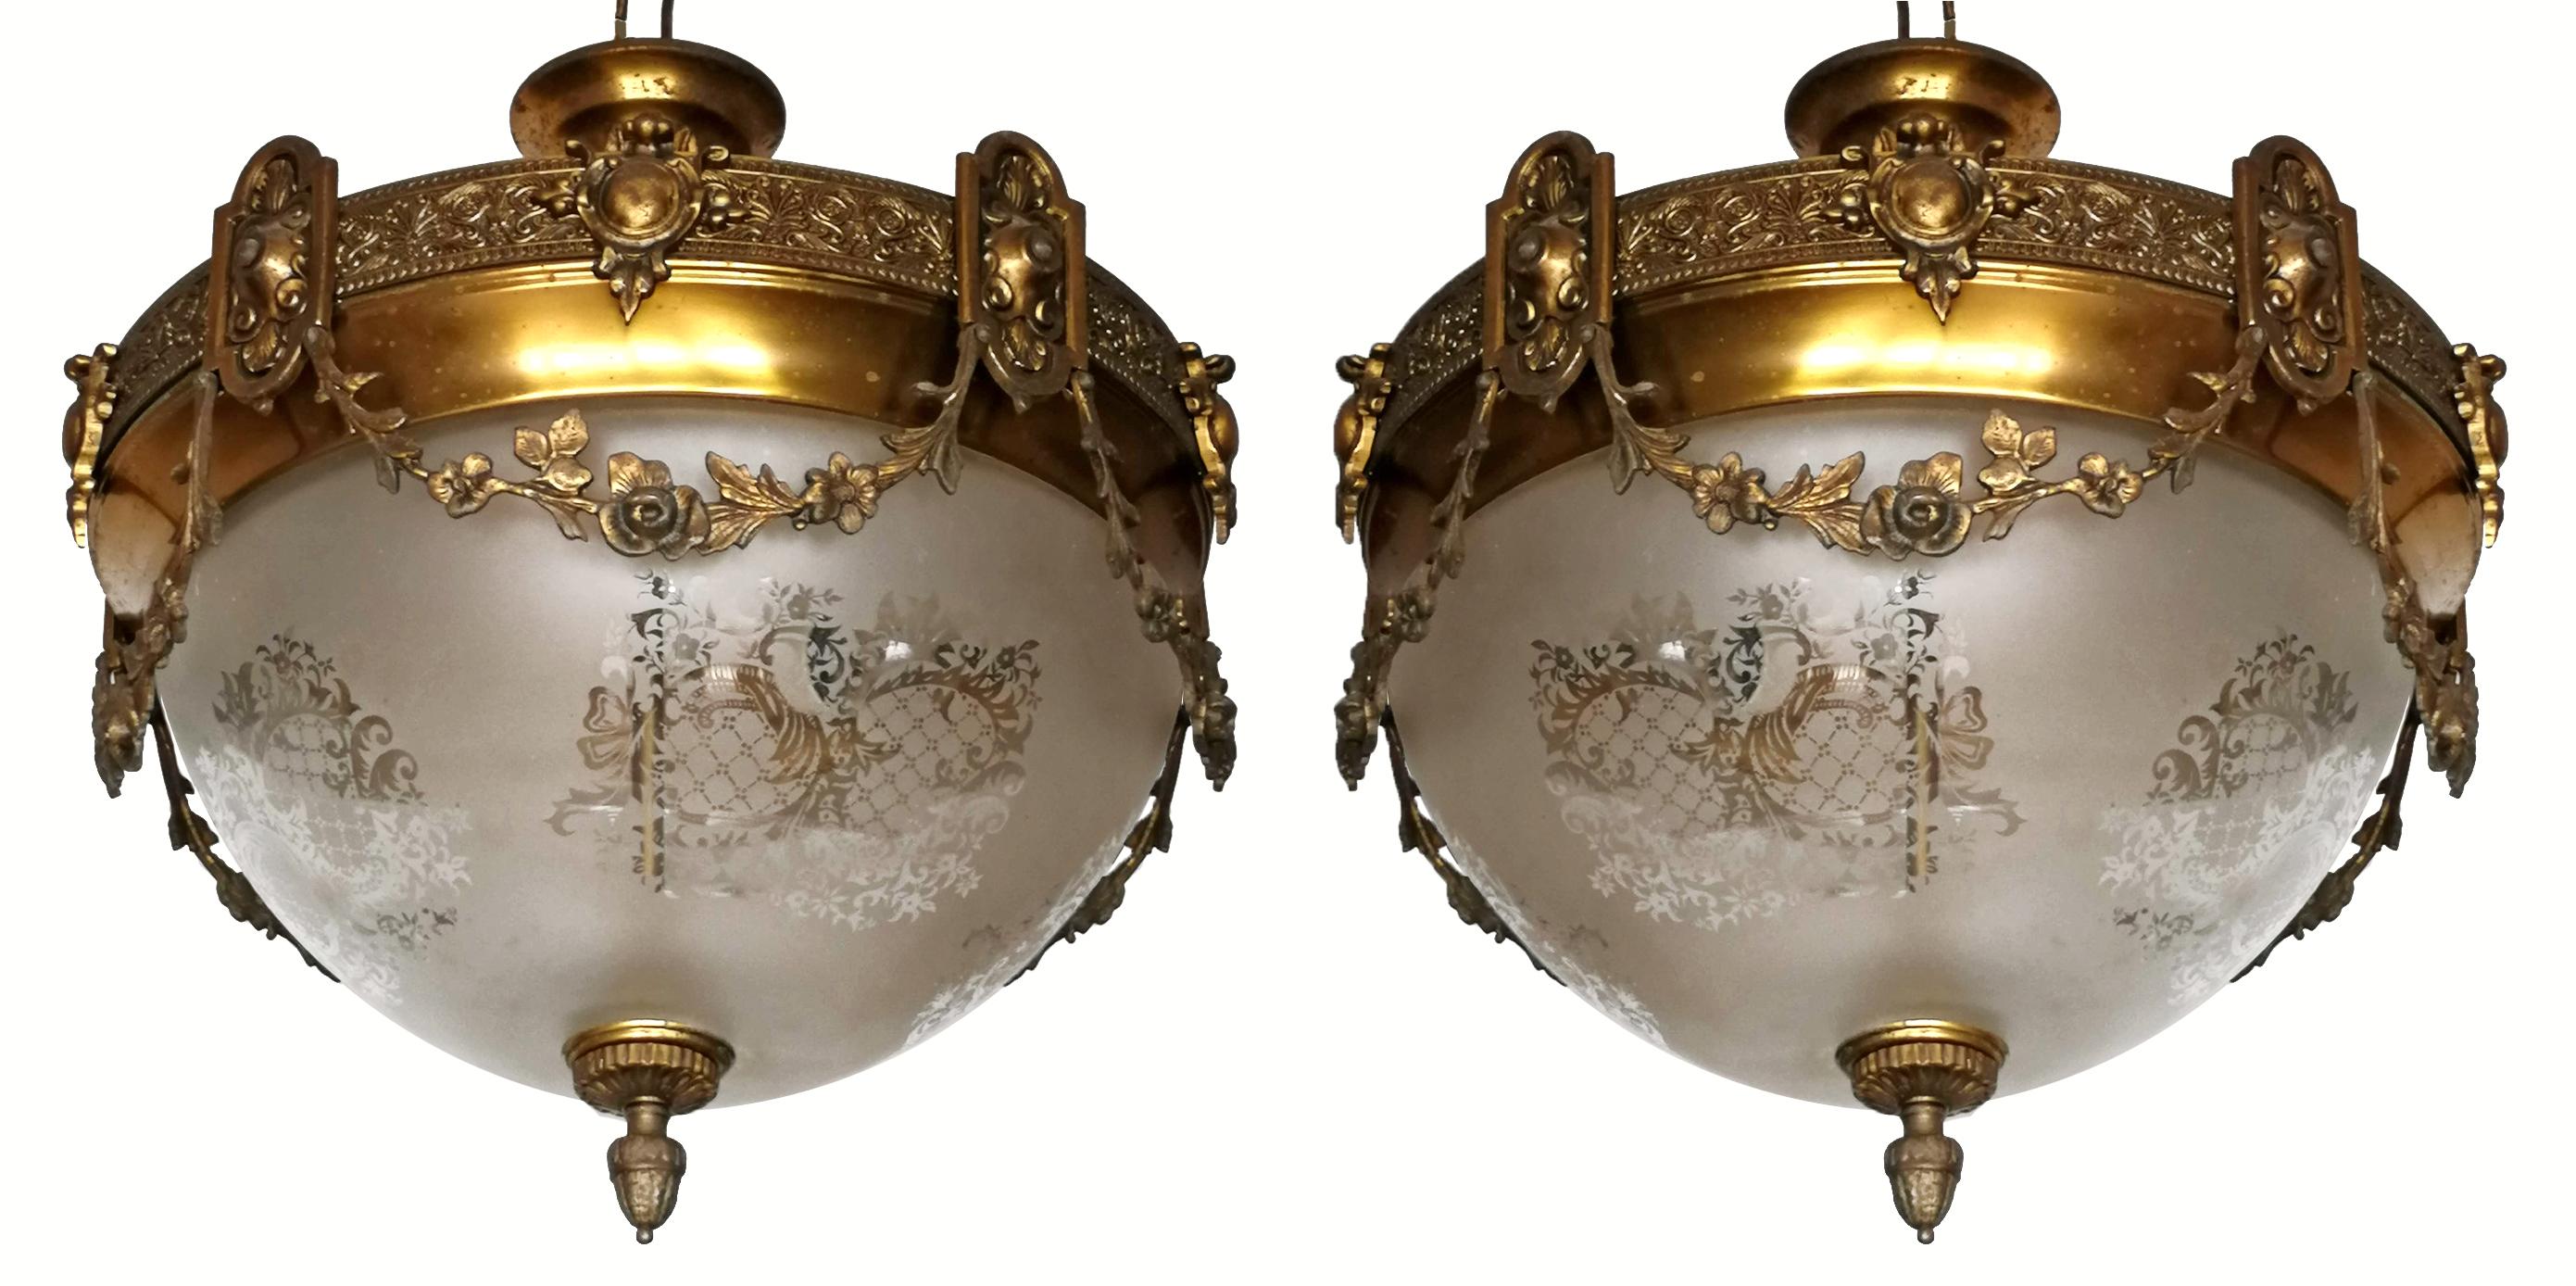 20th Century Pair of French Art Nouveau Bronze & Brass Etched Glass Chandeliers, Flush Mounts